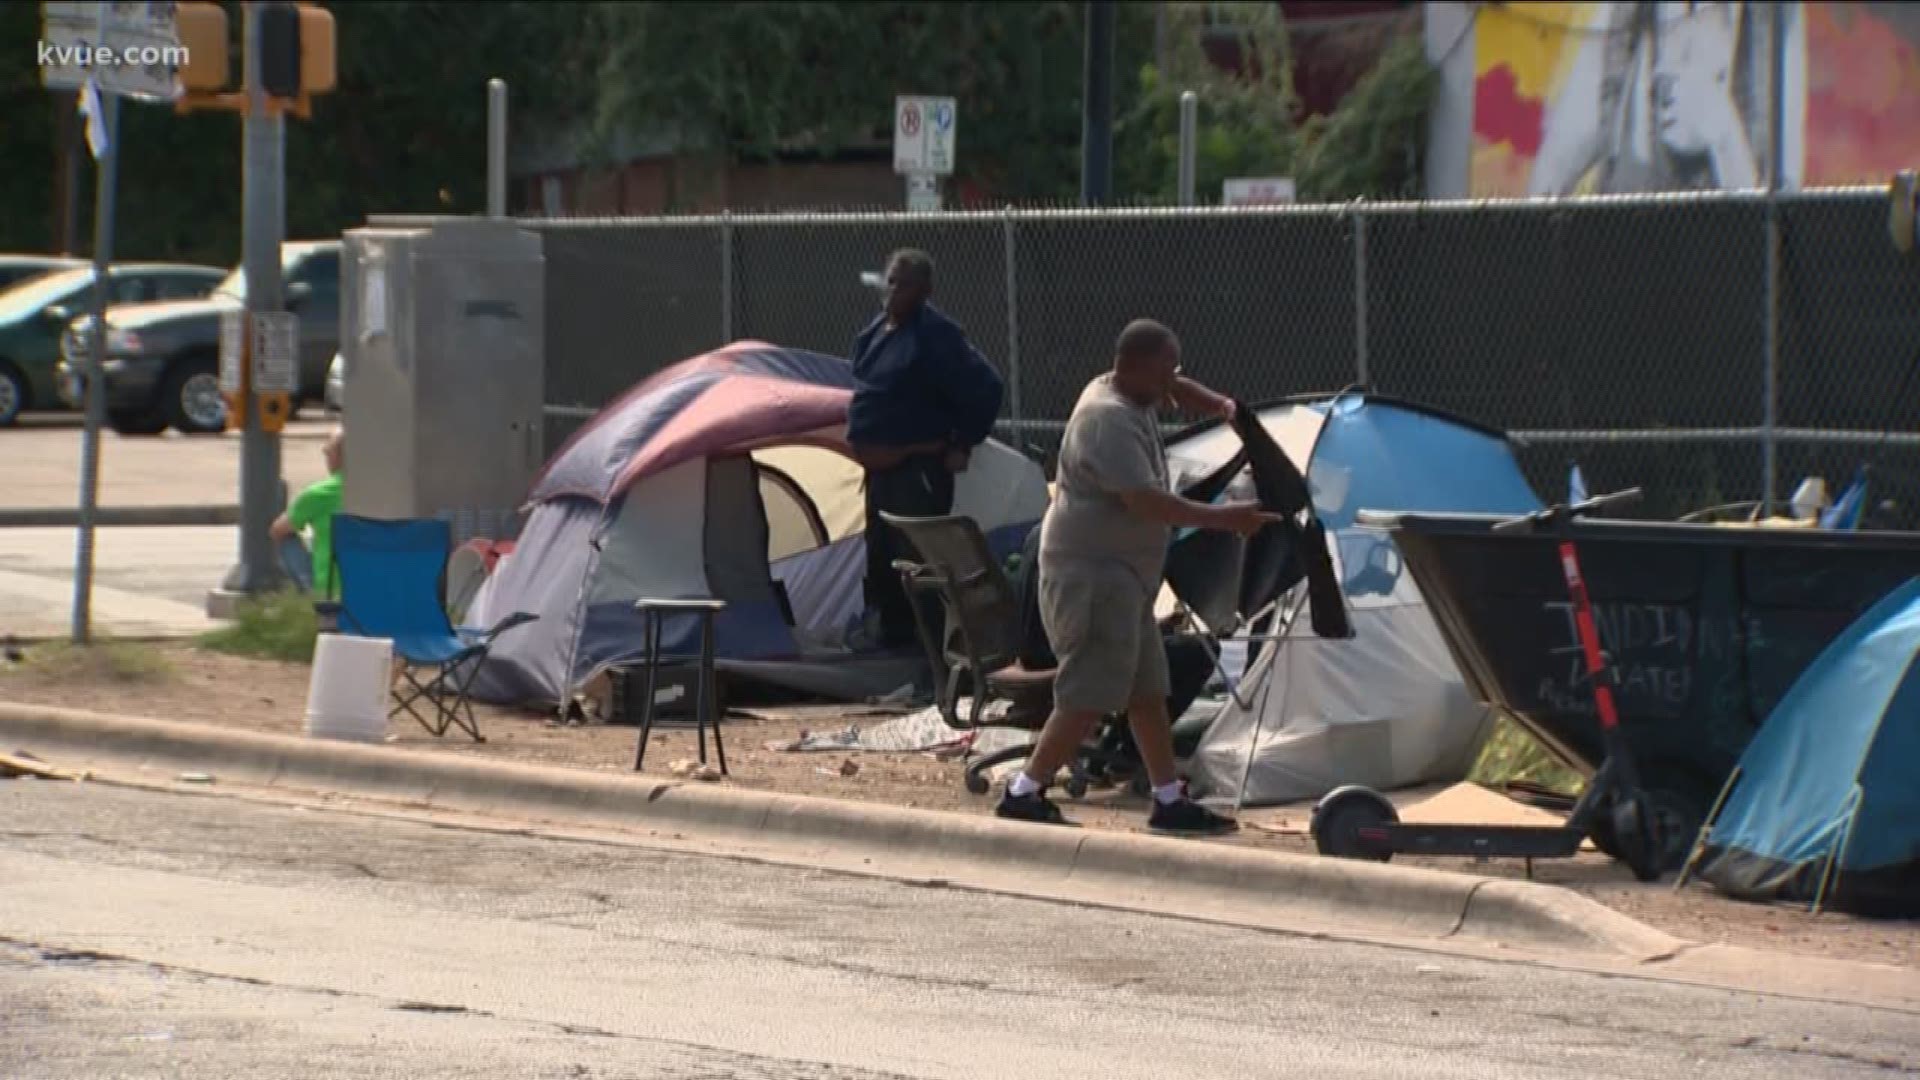 Camping outside of the ARCH could be a thing of the past no matter what happens with the city council's vote on homelessness.